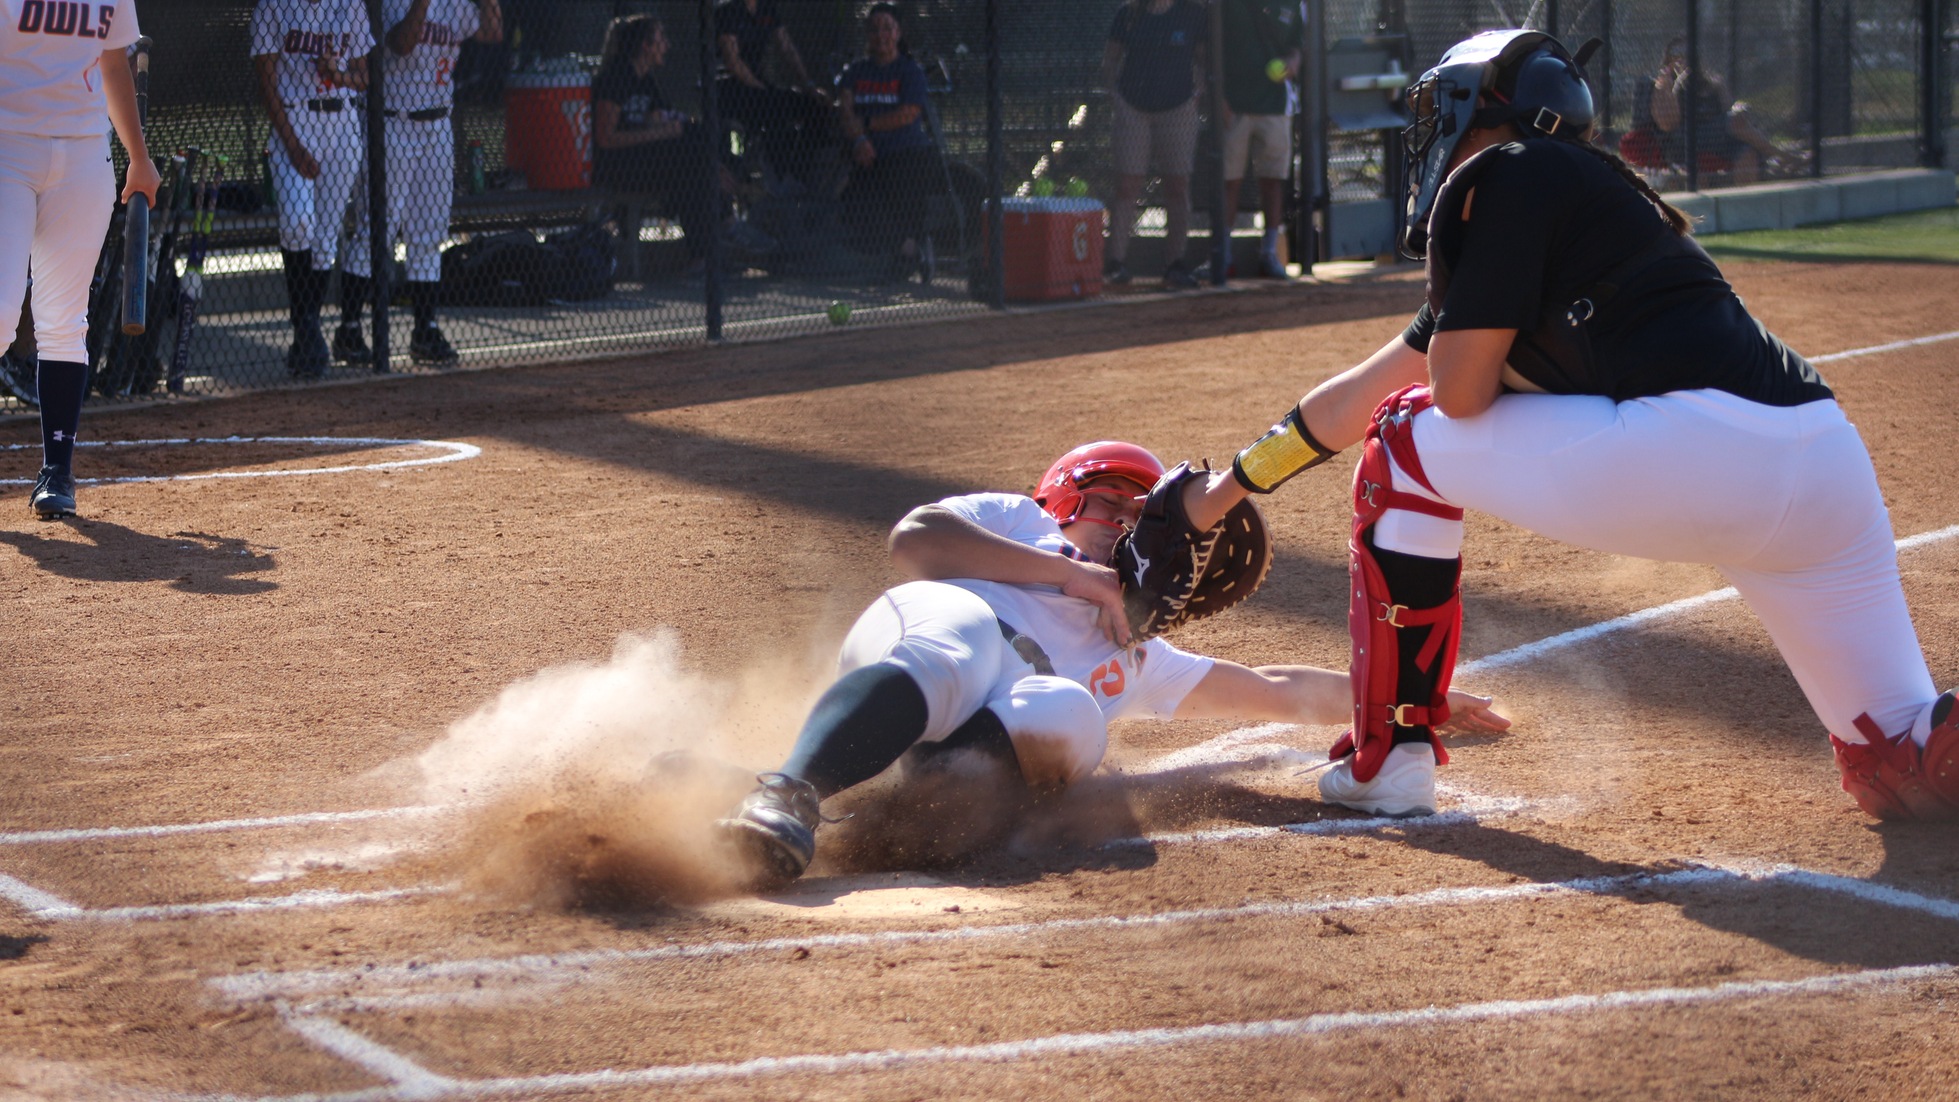 Hailee Reinert avoids the tag to score for the Owls. Photo by: Brianna Jara